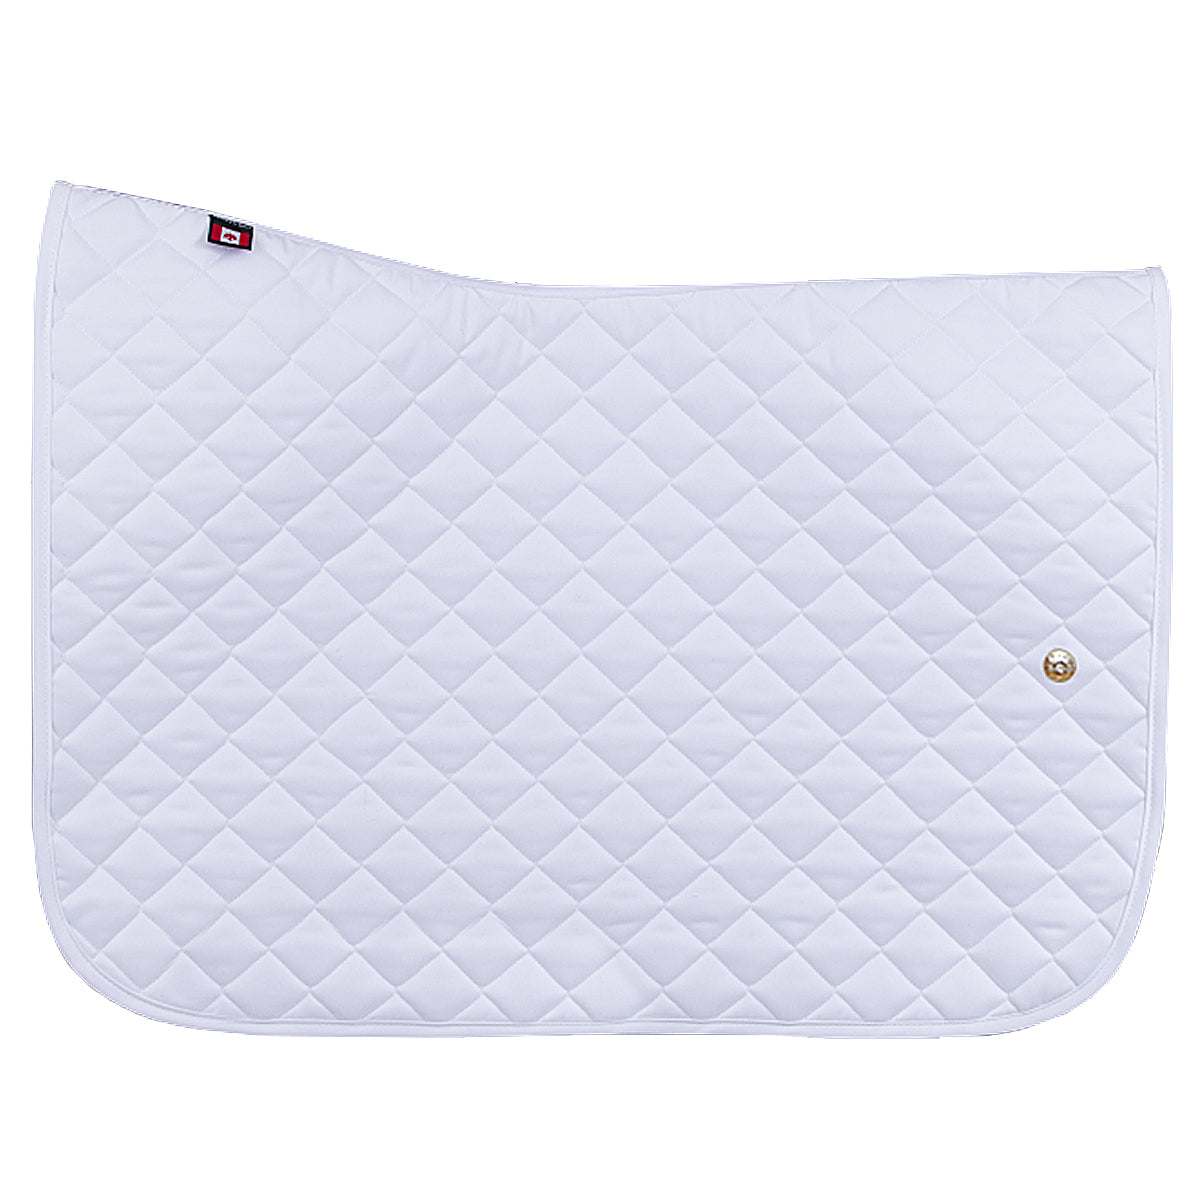 Ogilvy Equestrian Jumper Baby Pad in White